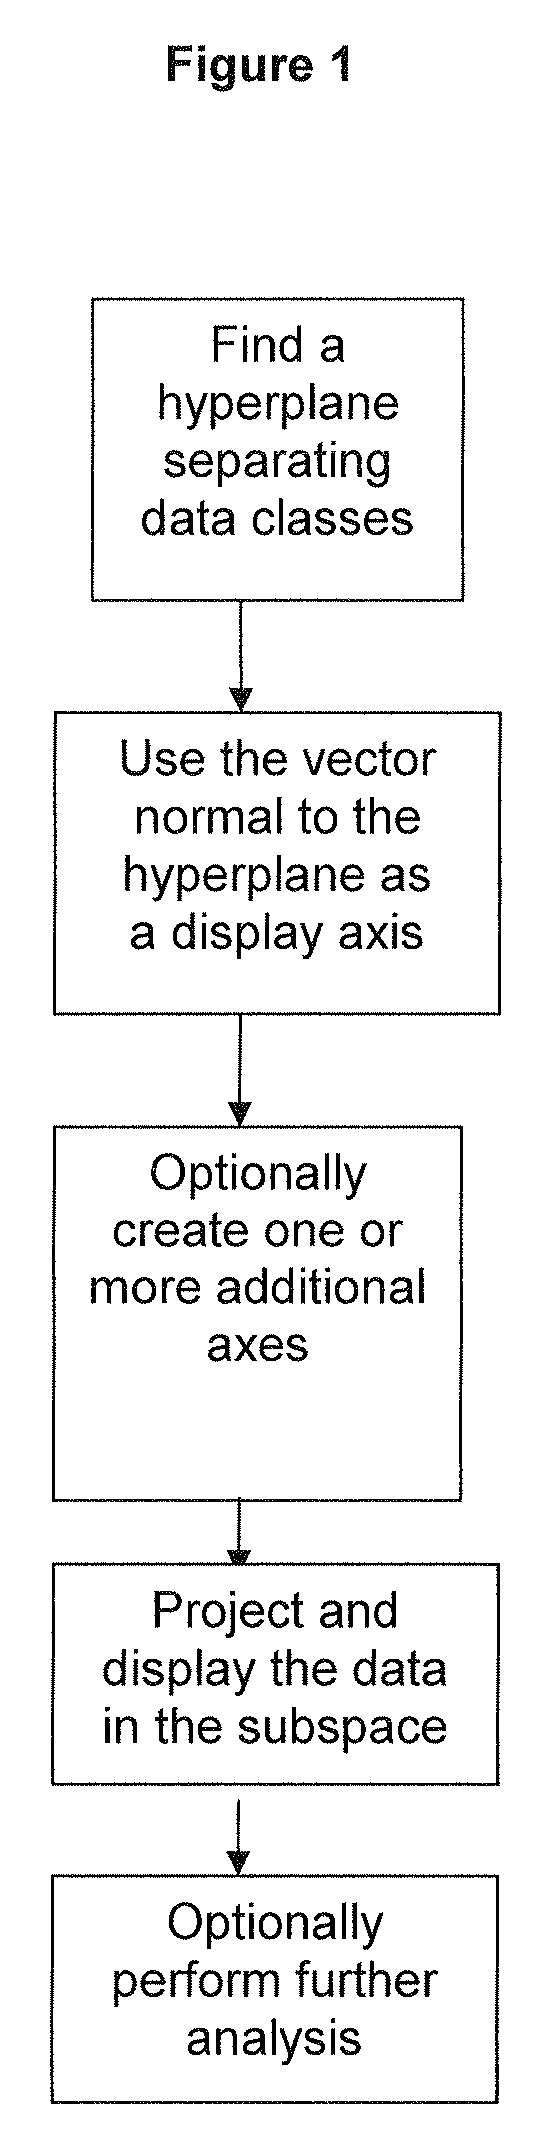 Methods for mapping data into lower dimensions